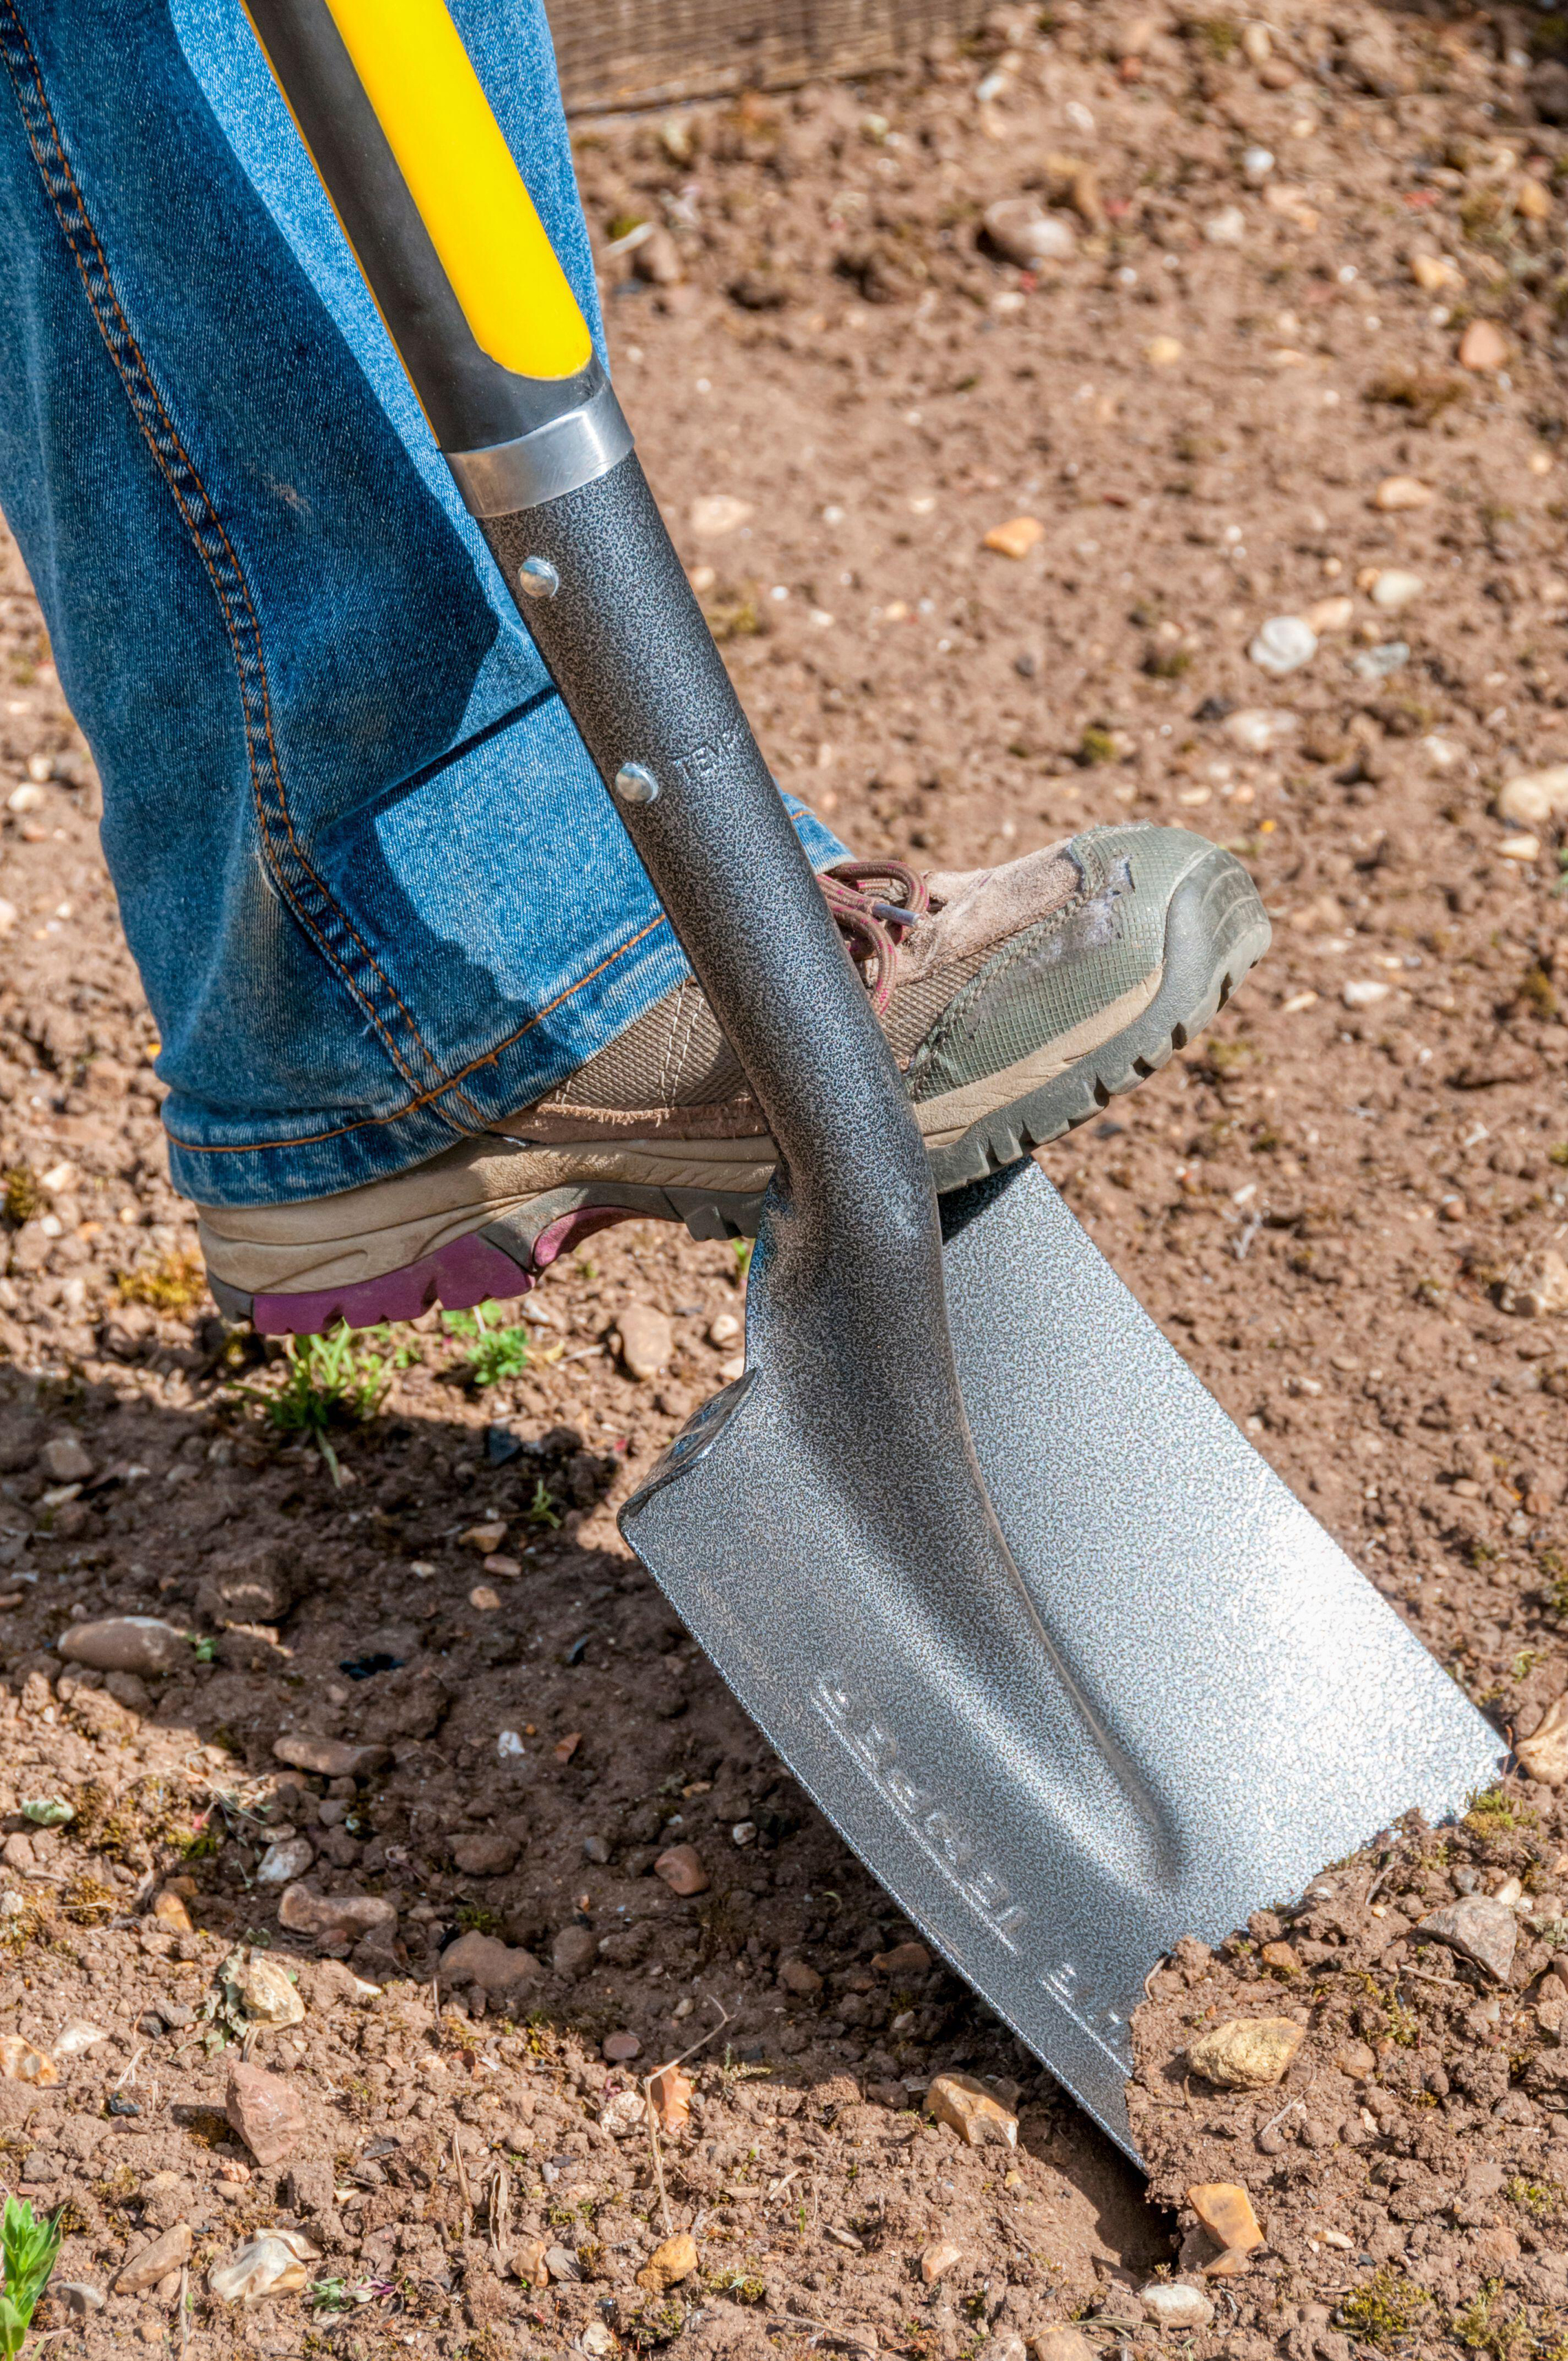 Digging with a spade (Alamy/PA)